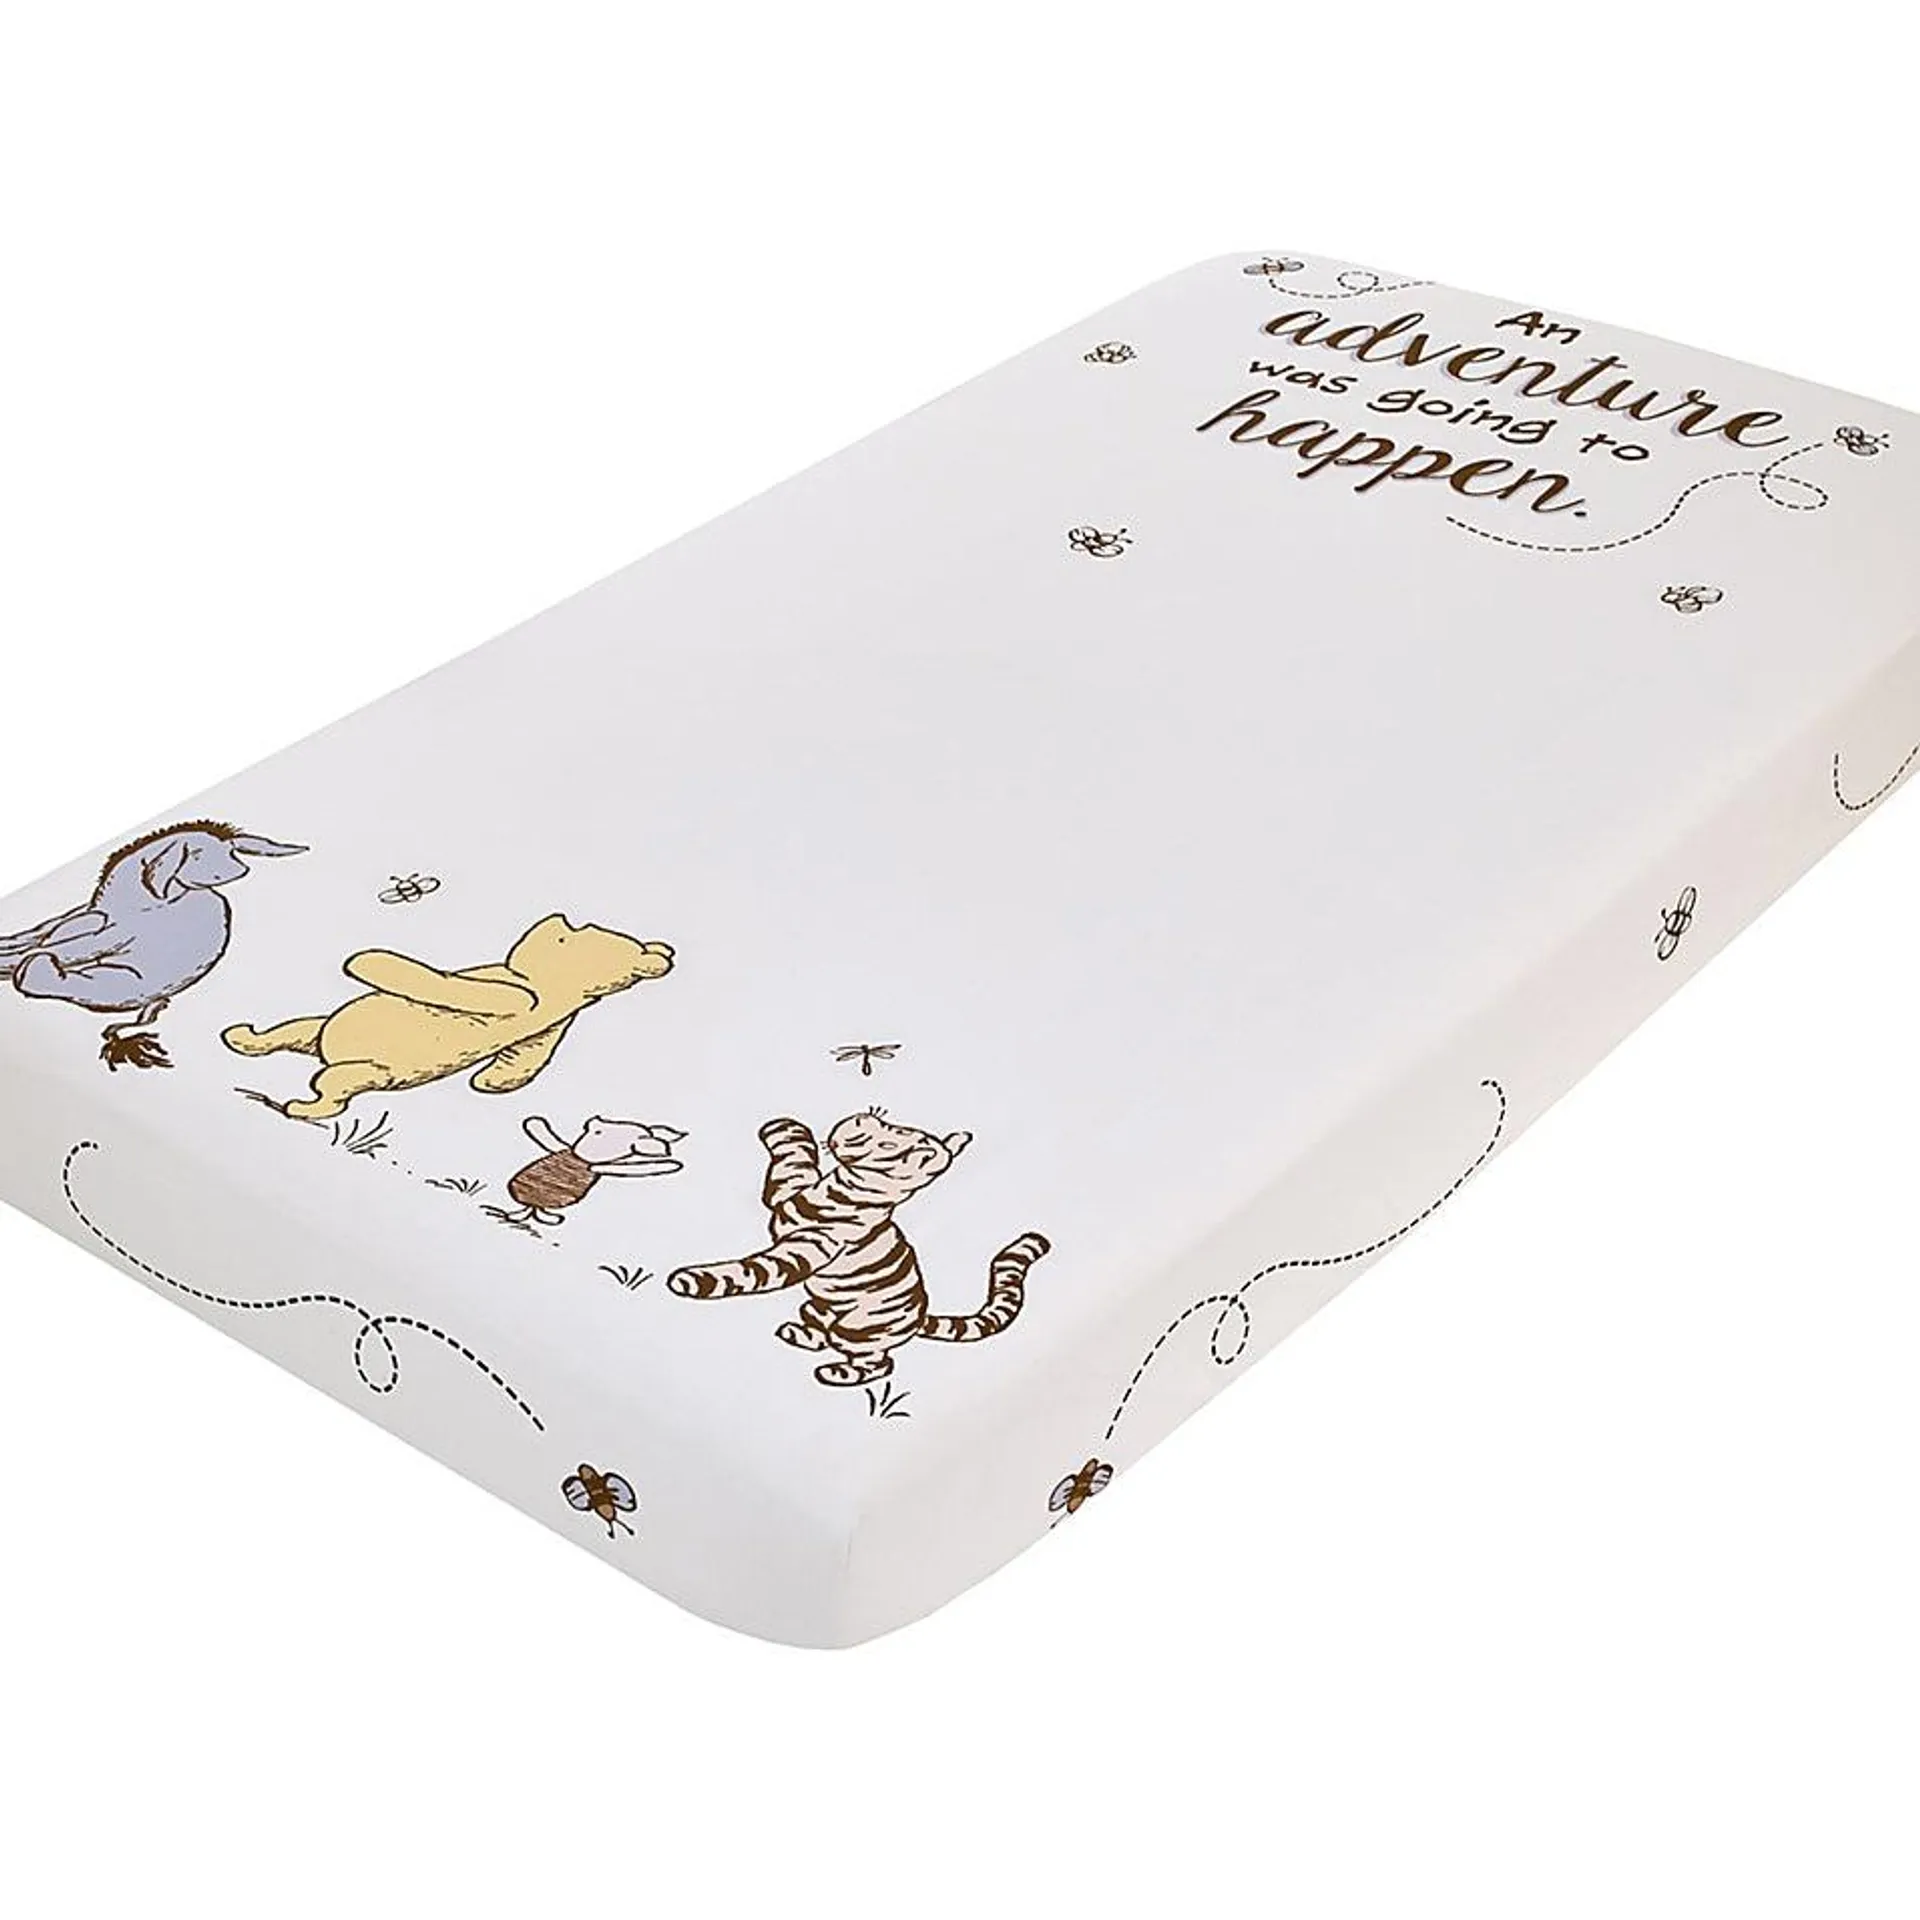 Disney Classic Pooh Hunny Fun with Piglet, Eeyore and Tigger White 100% Cotton Nursery Fitted Crib Sheet